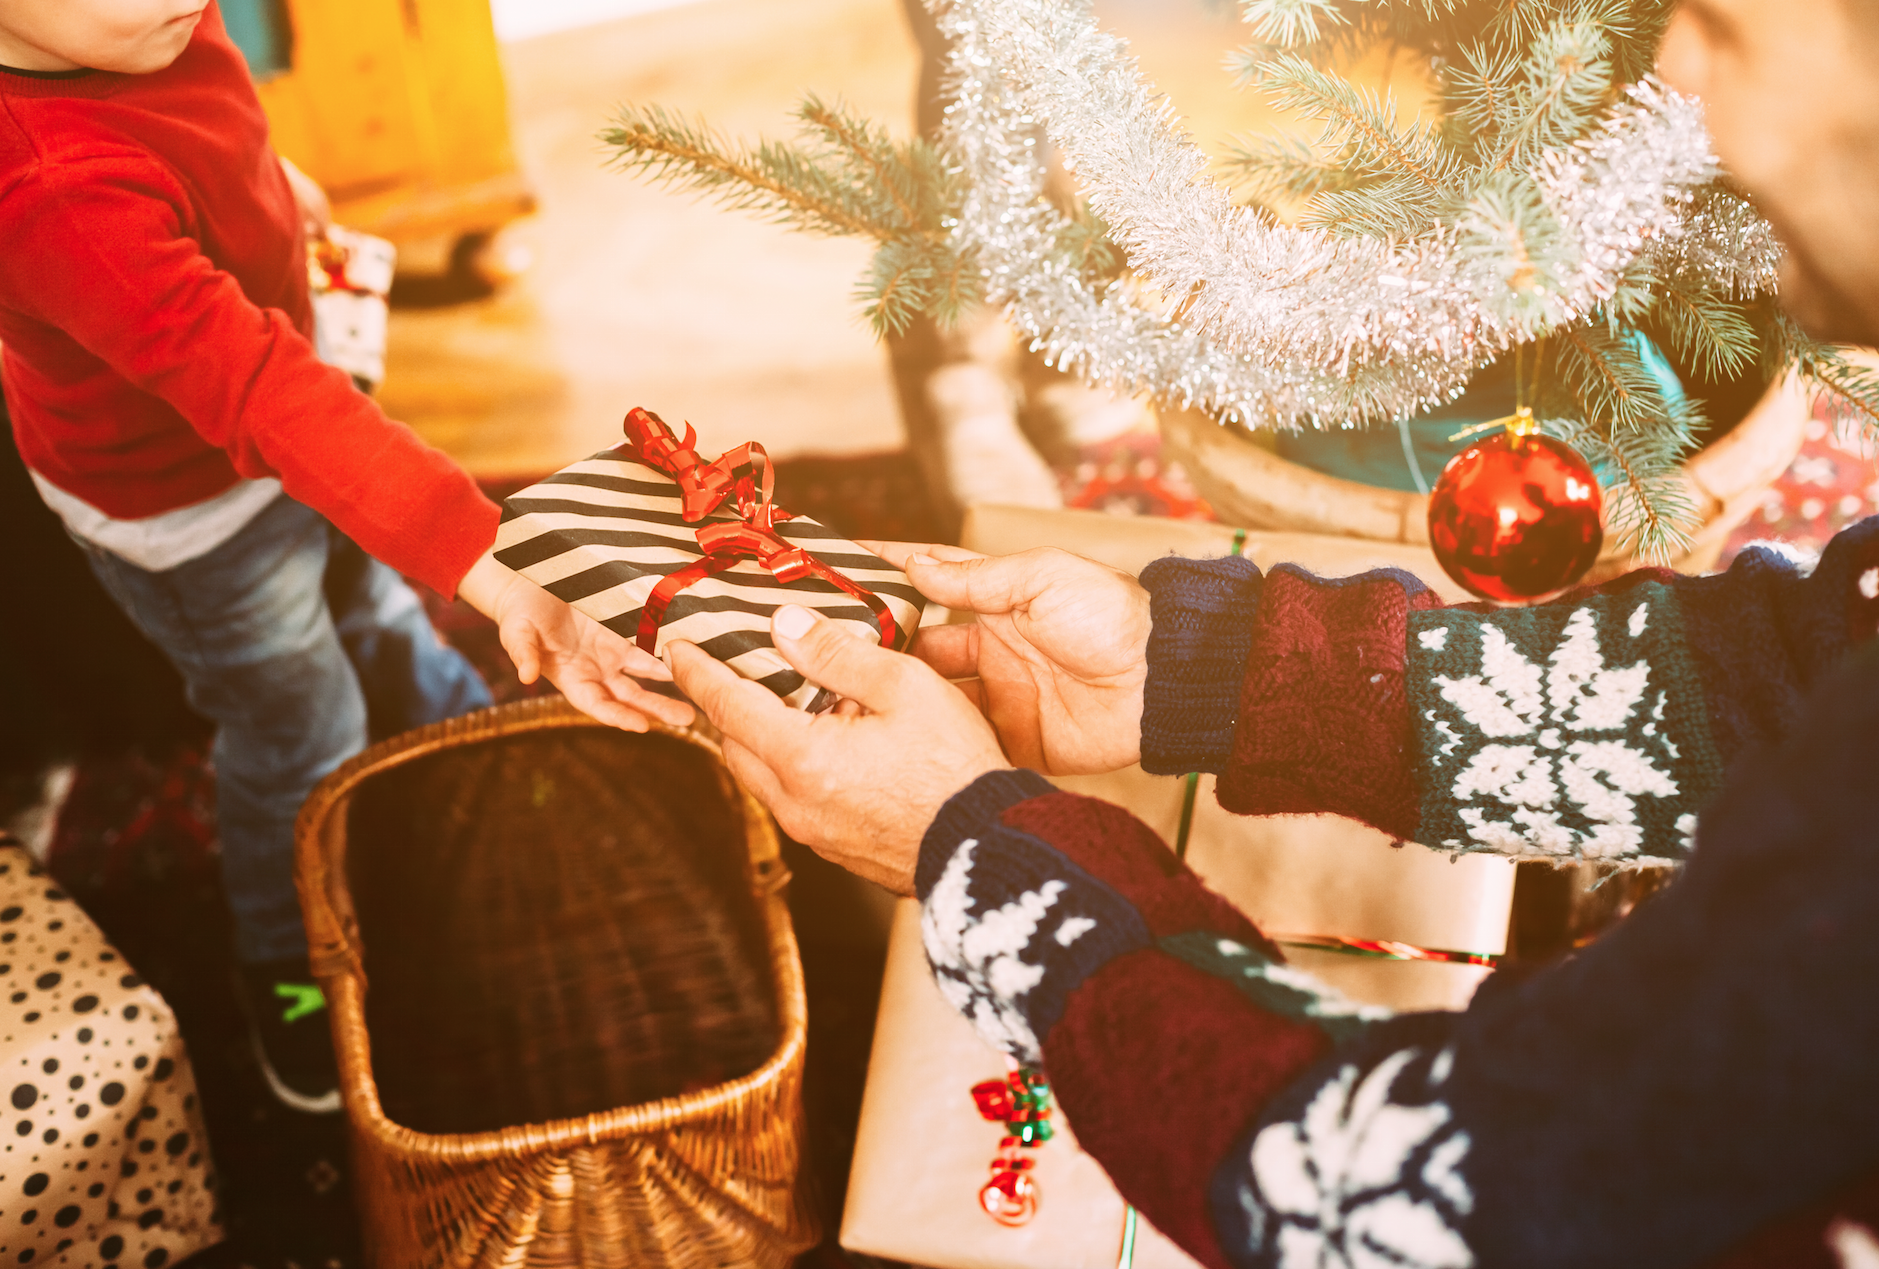 3 Ways to Make the Most of Christmas